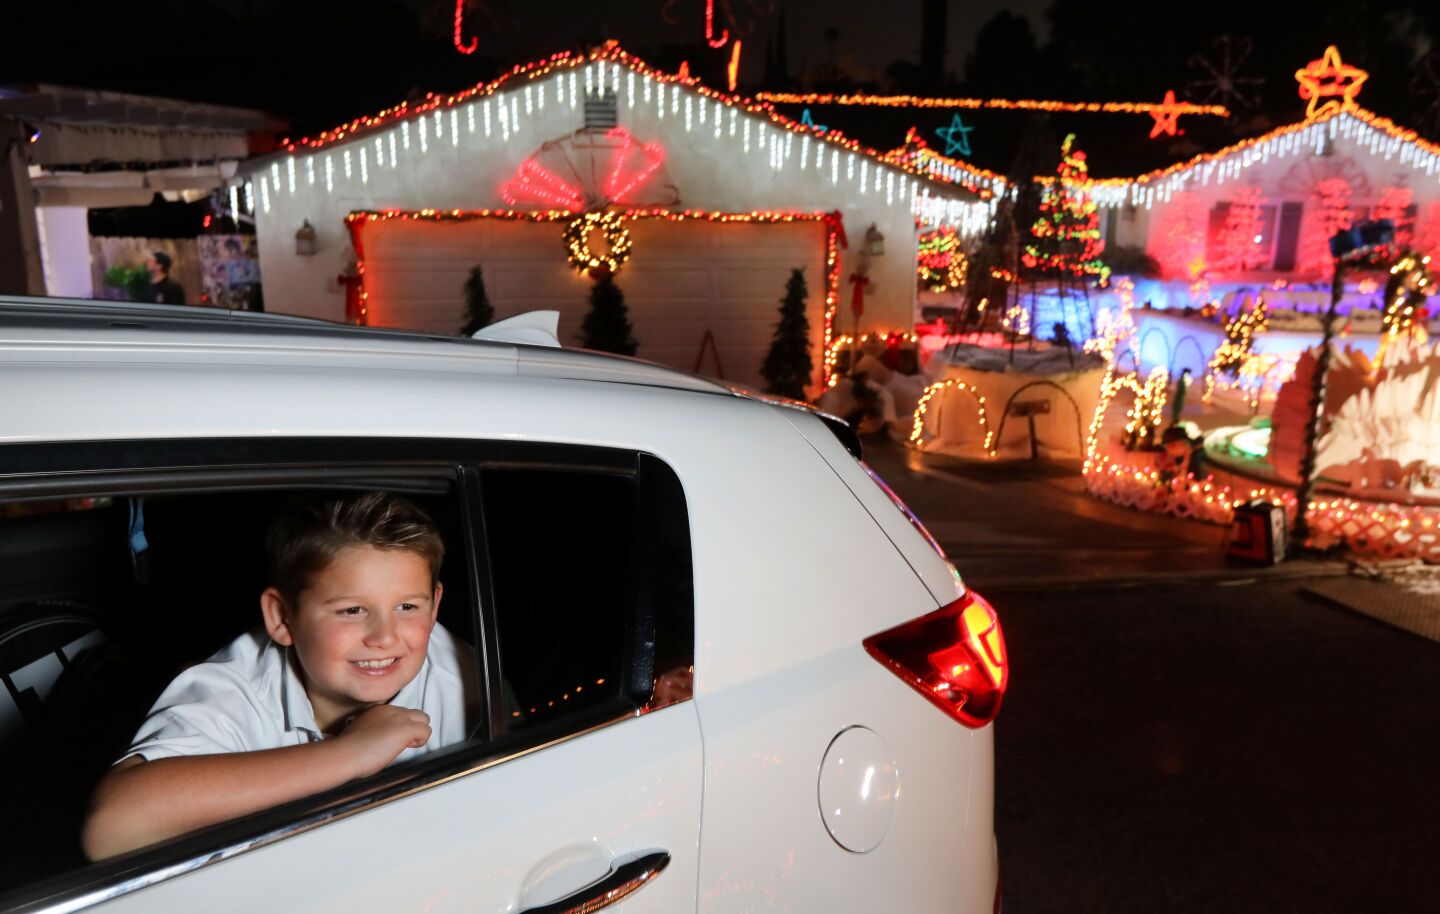 Eight-year-old Logan Taylor enjoys the extensive Christmas decorations on both side of the circular driveway of the home of Mack Schreiber on Reche Road in Fallbrook. A steady stream of vehicles pass through.